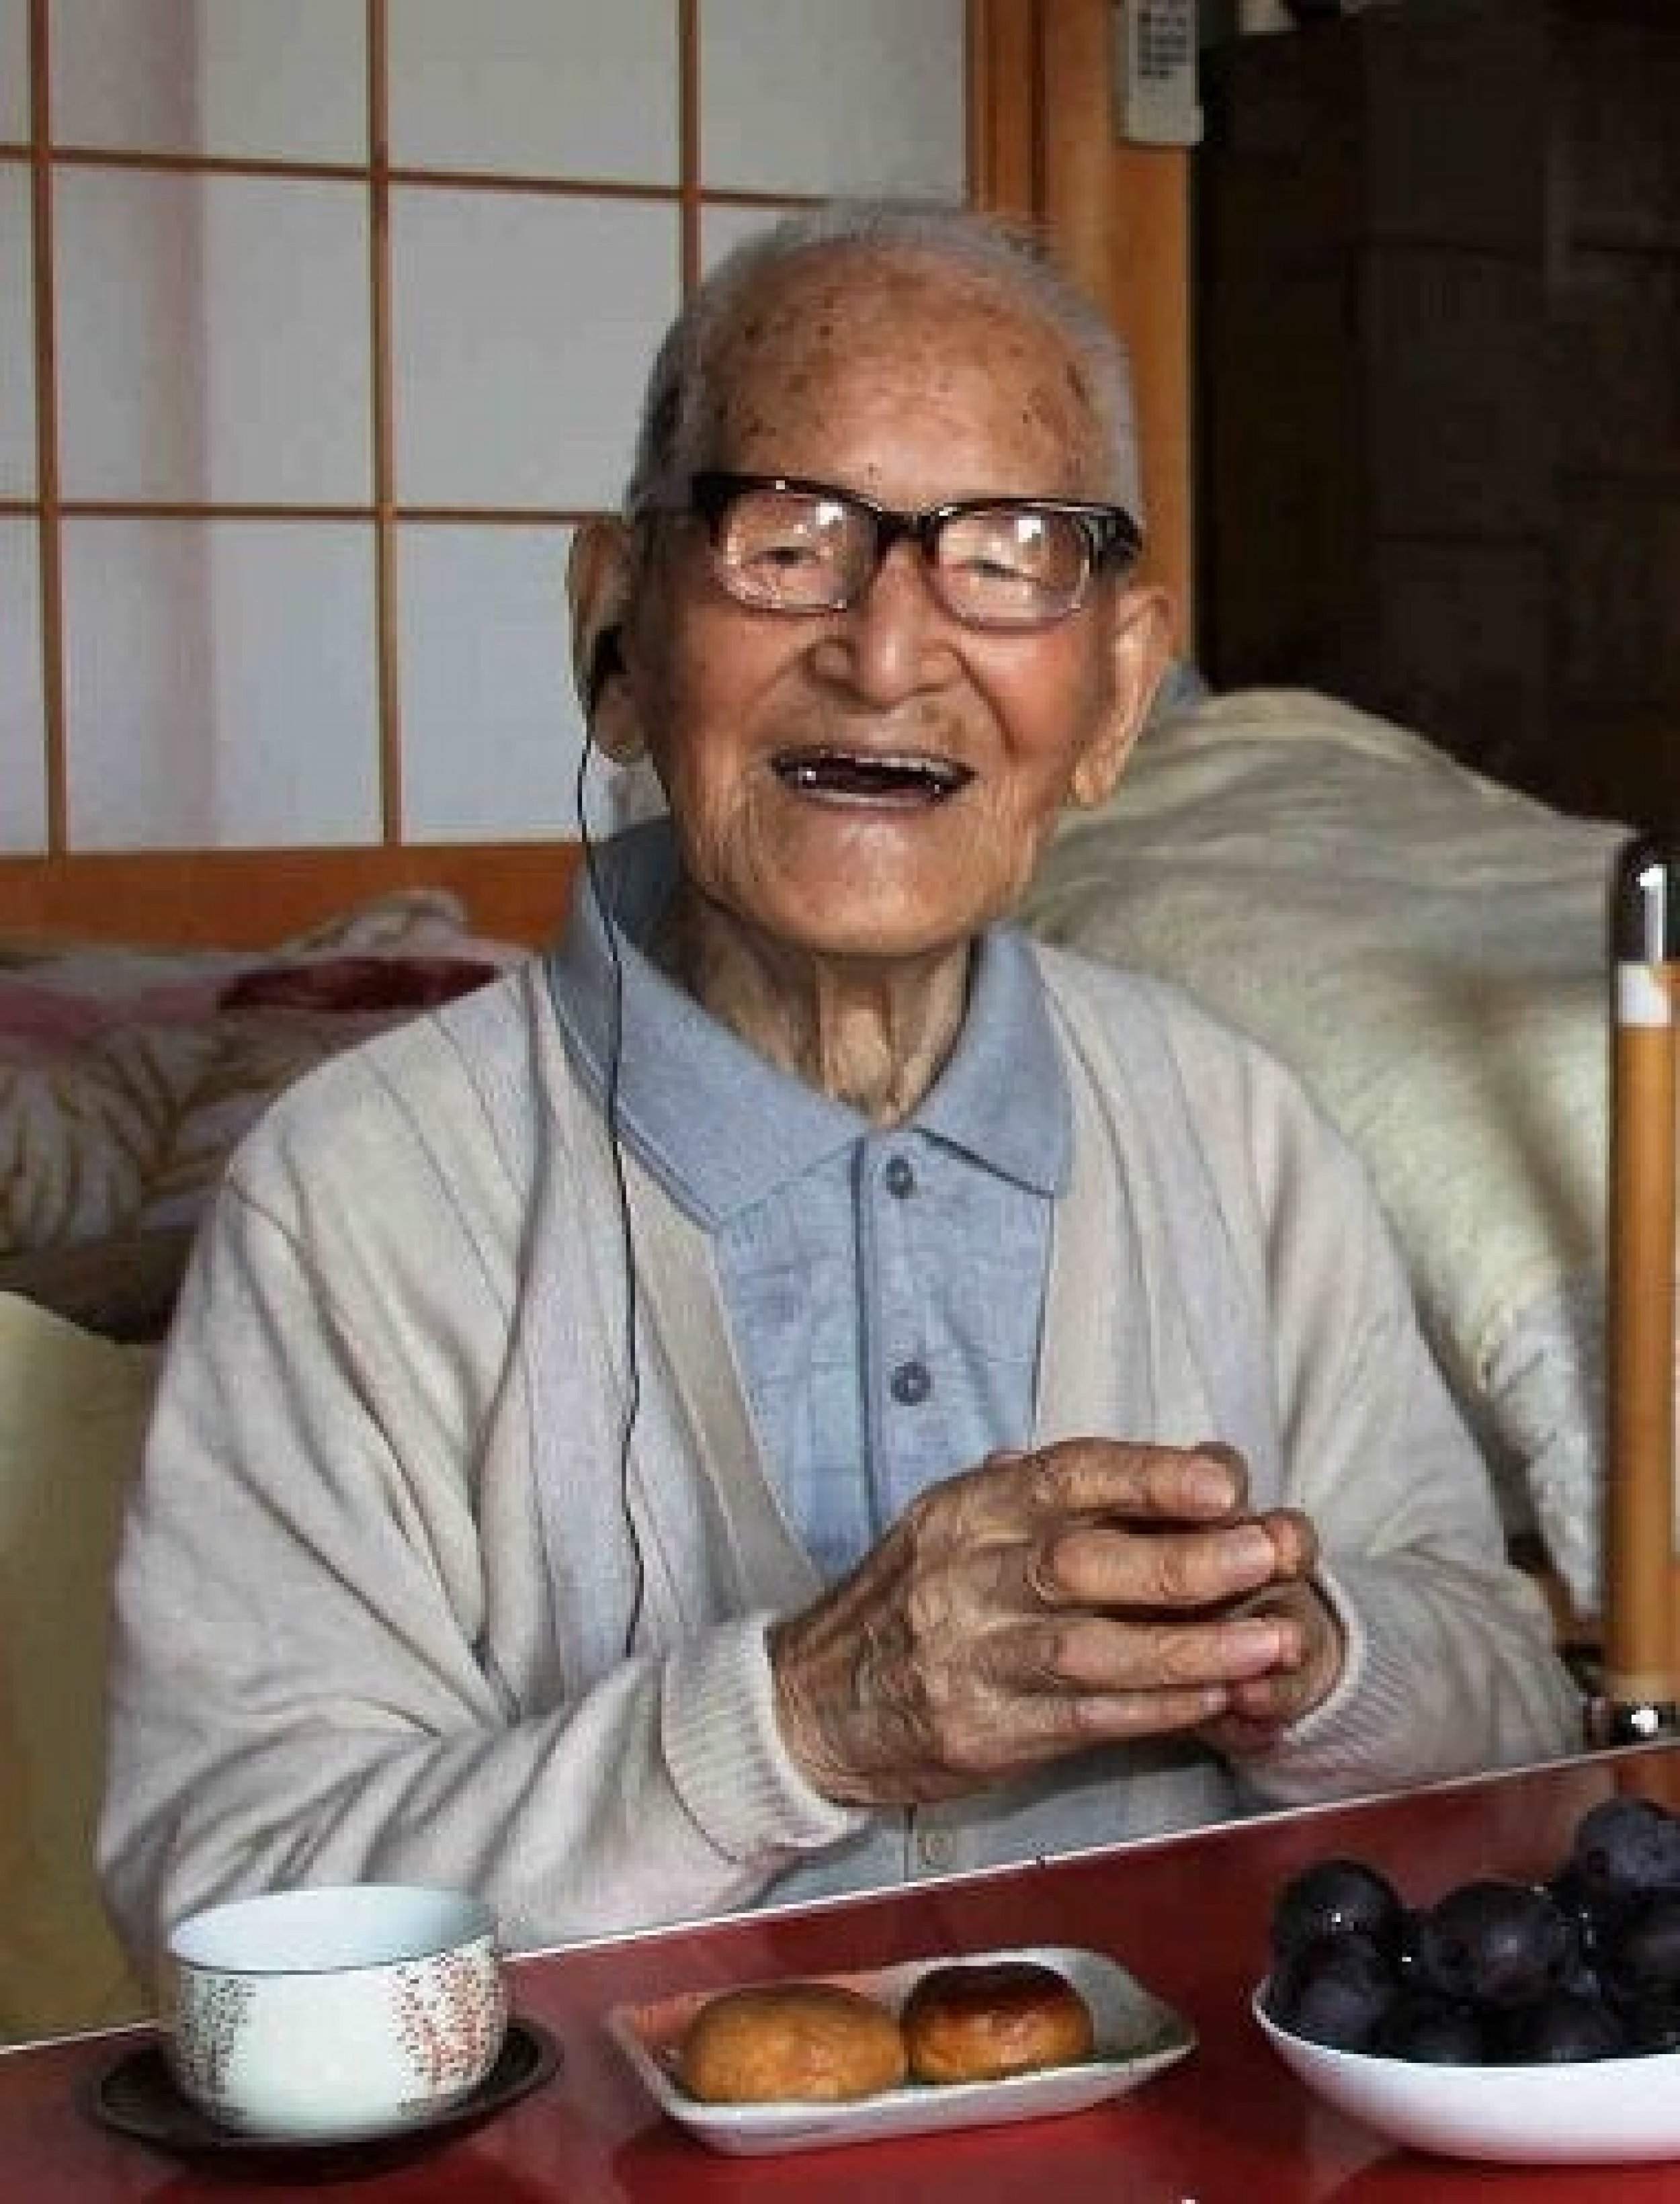 Jiroemon Kimura, the worlds oldest living man, celebrated his 115th birthday on Thursday and shared his secret to a long life.